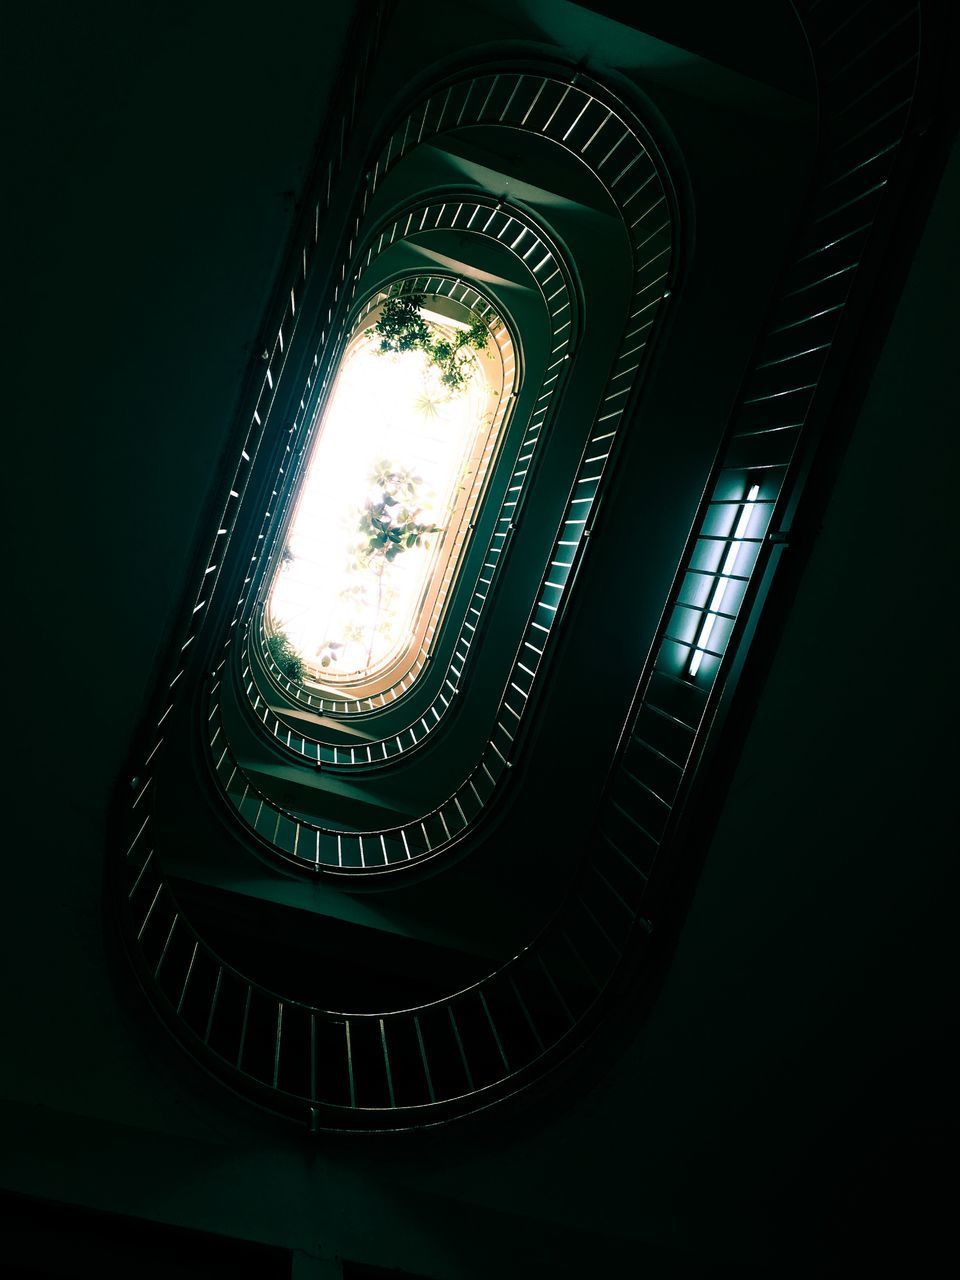 LOW ANGLE VIEW OF ILLUMINATED SPIRAL STAIRCASE IN BUILDING